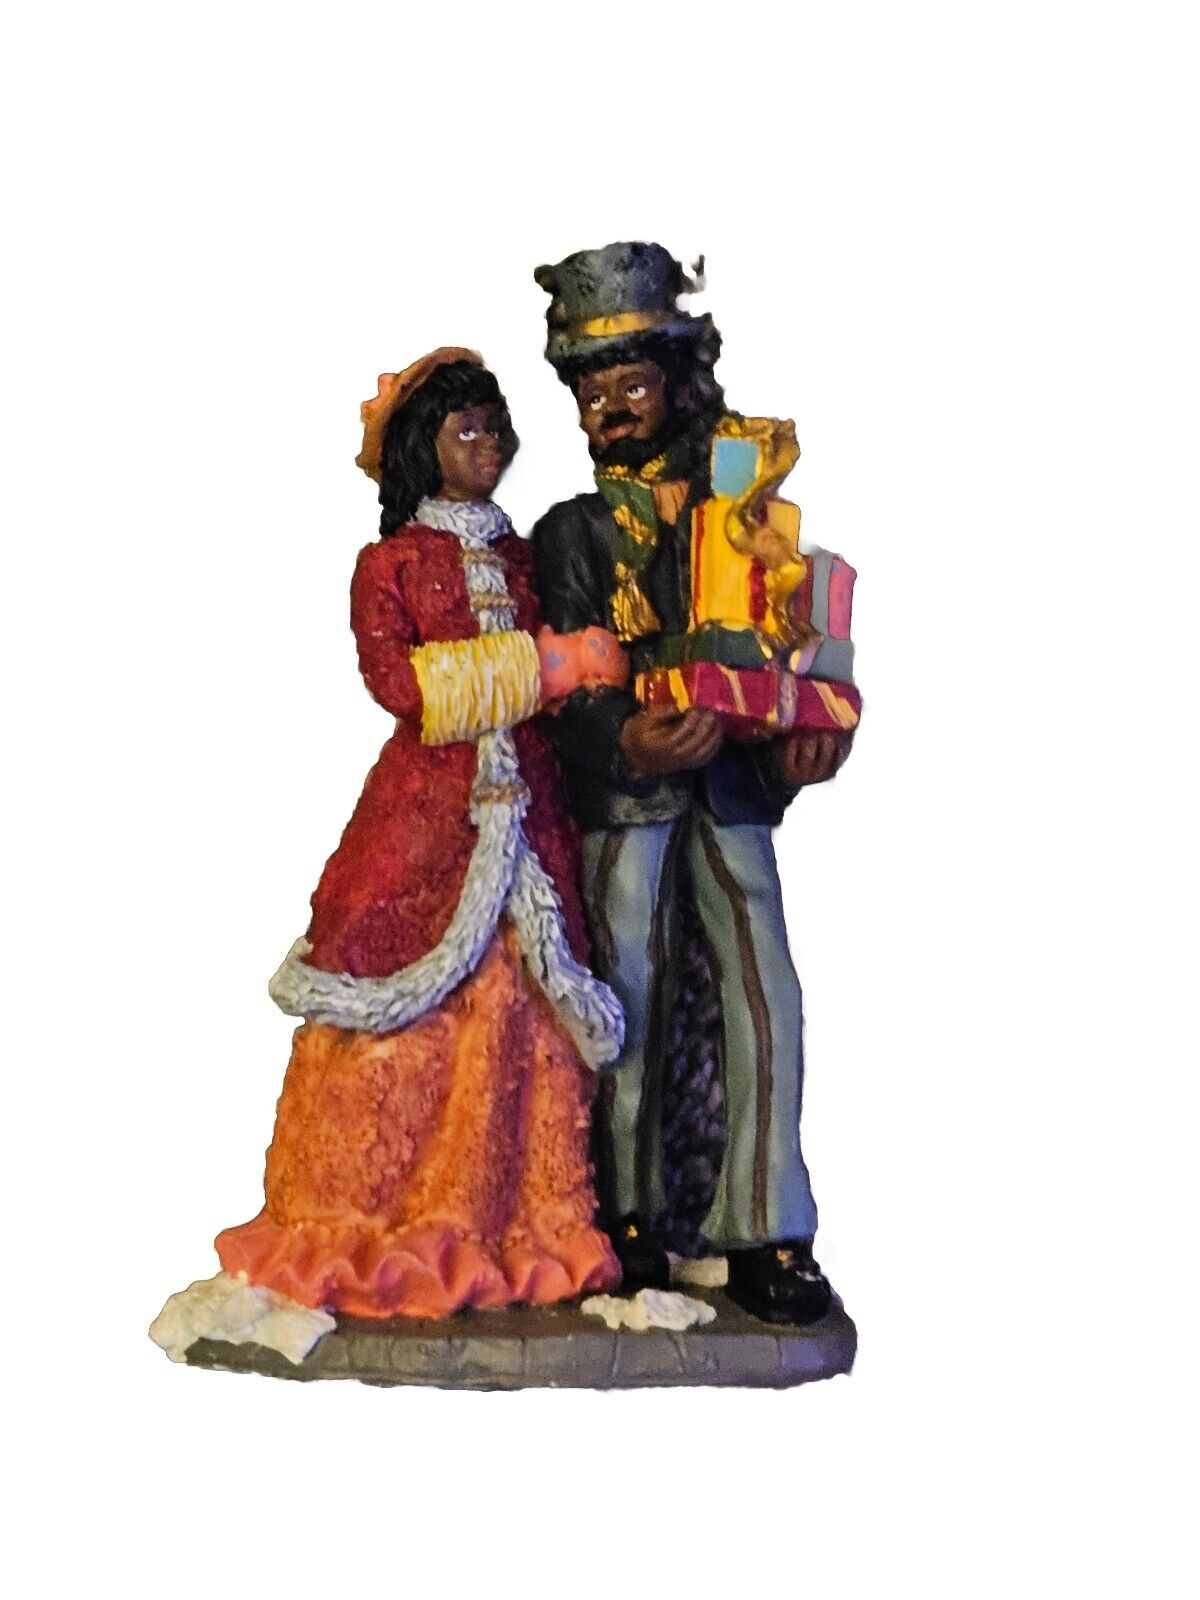 7” Resin African or African-American Couple Dressy With Gifts.  Village Figurine